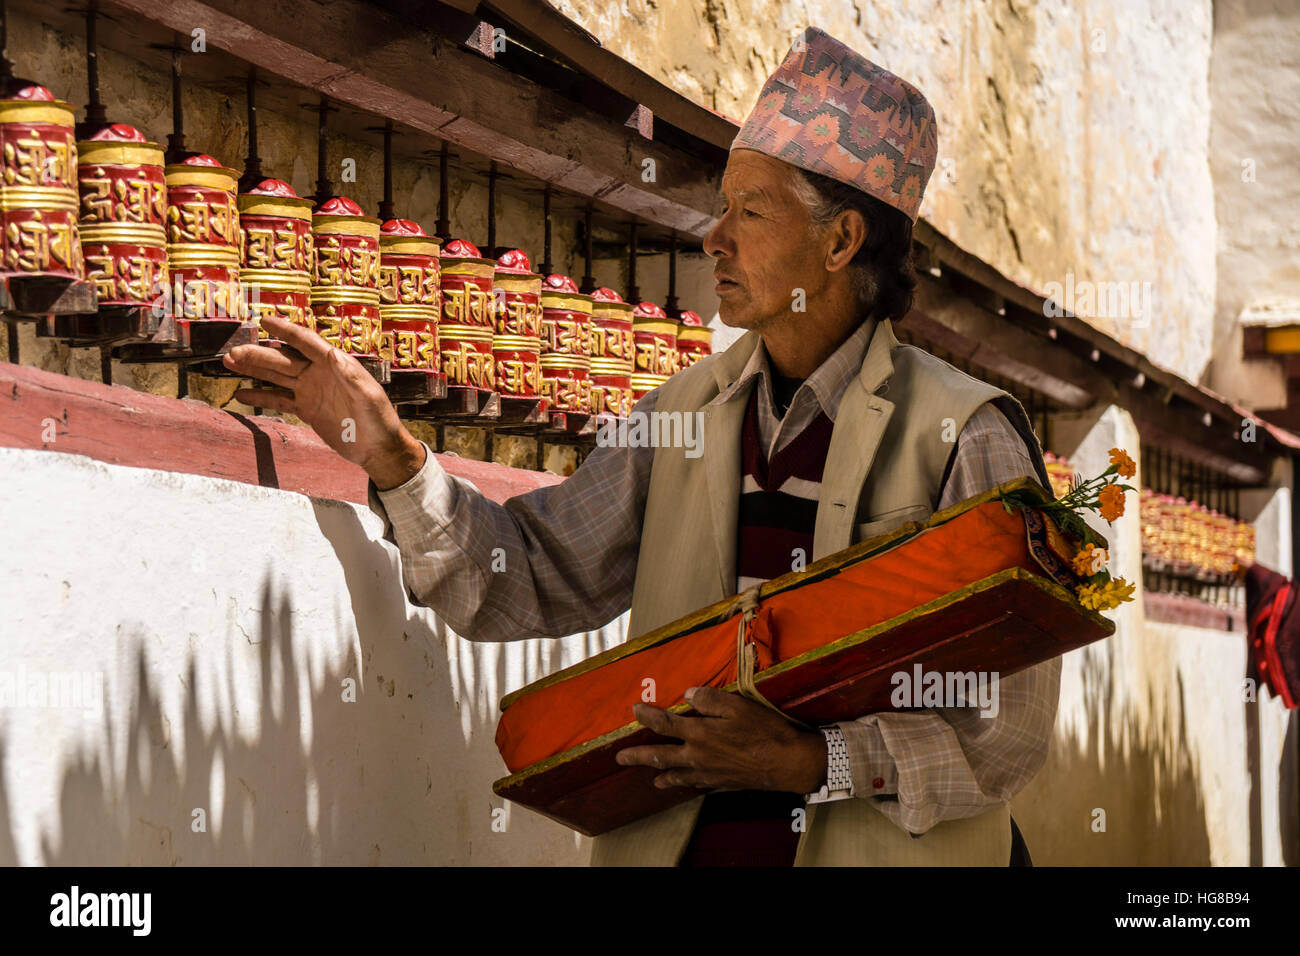 Local man, carrying a prayer book, is walking along the wall with spinning prayer wheels, Marpha, Mustang District, Nepal Stock Photo